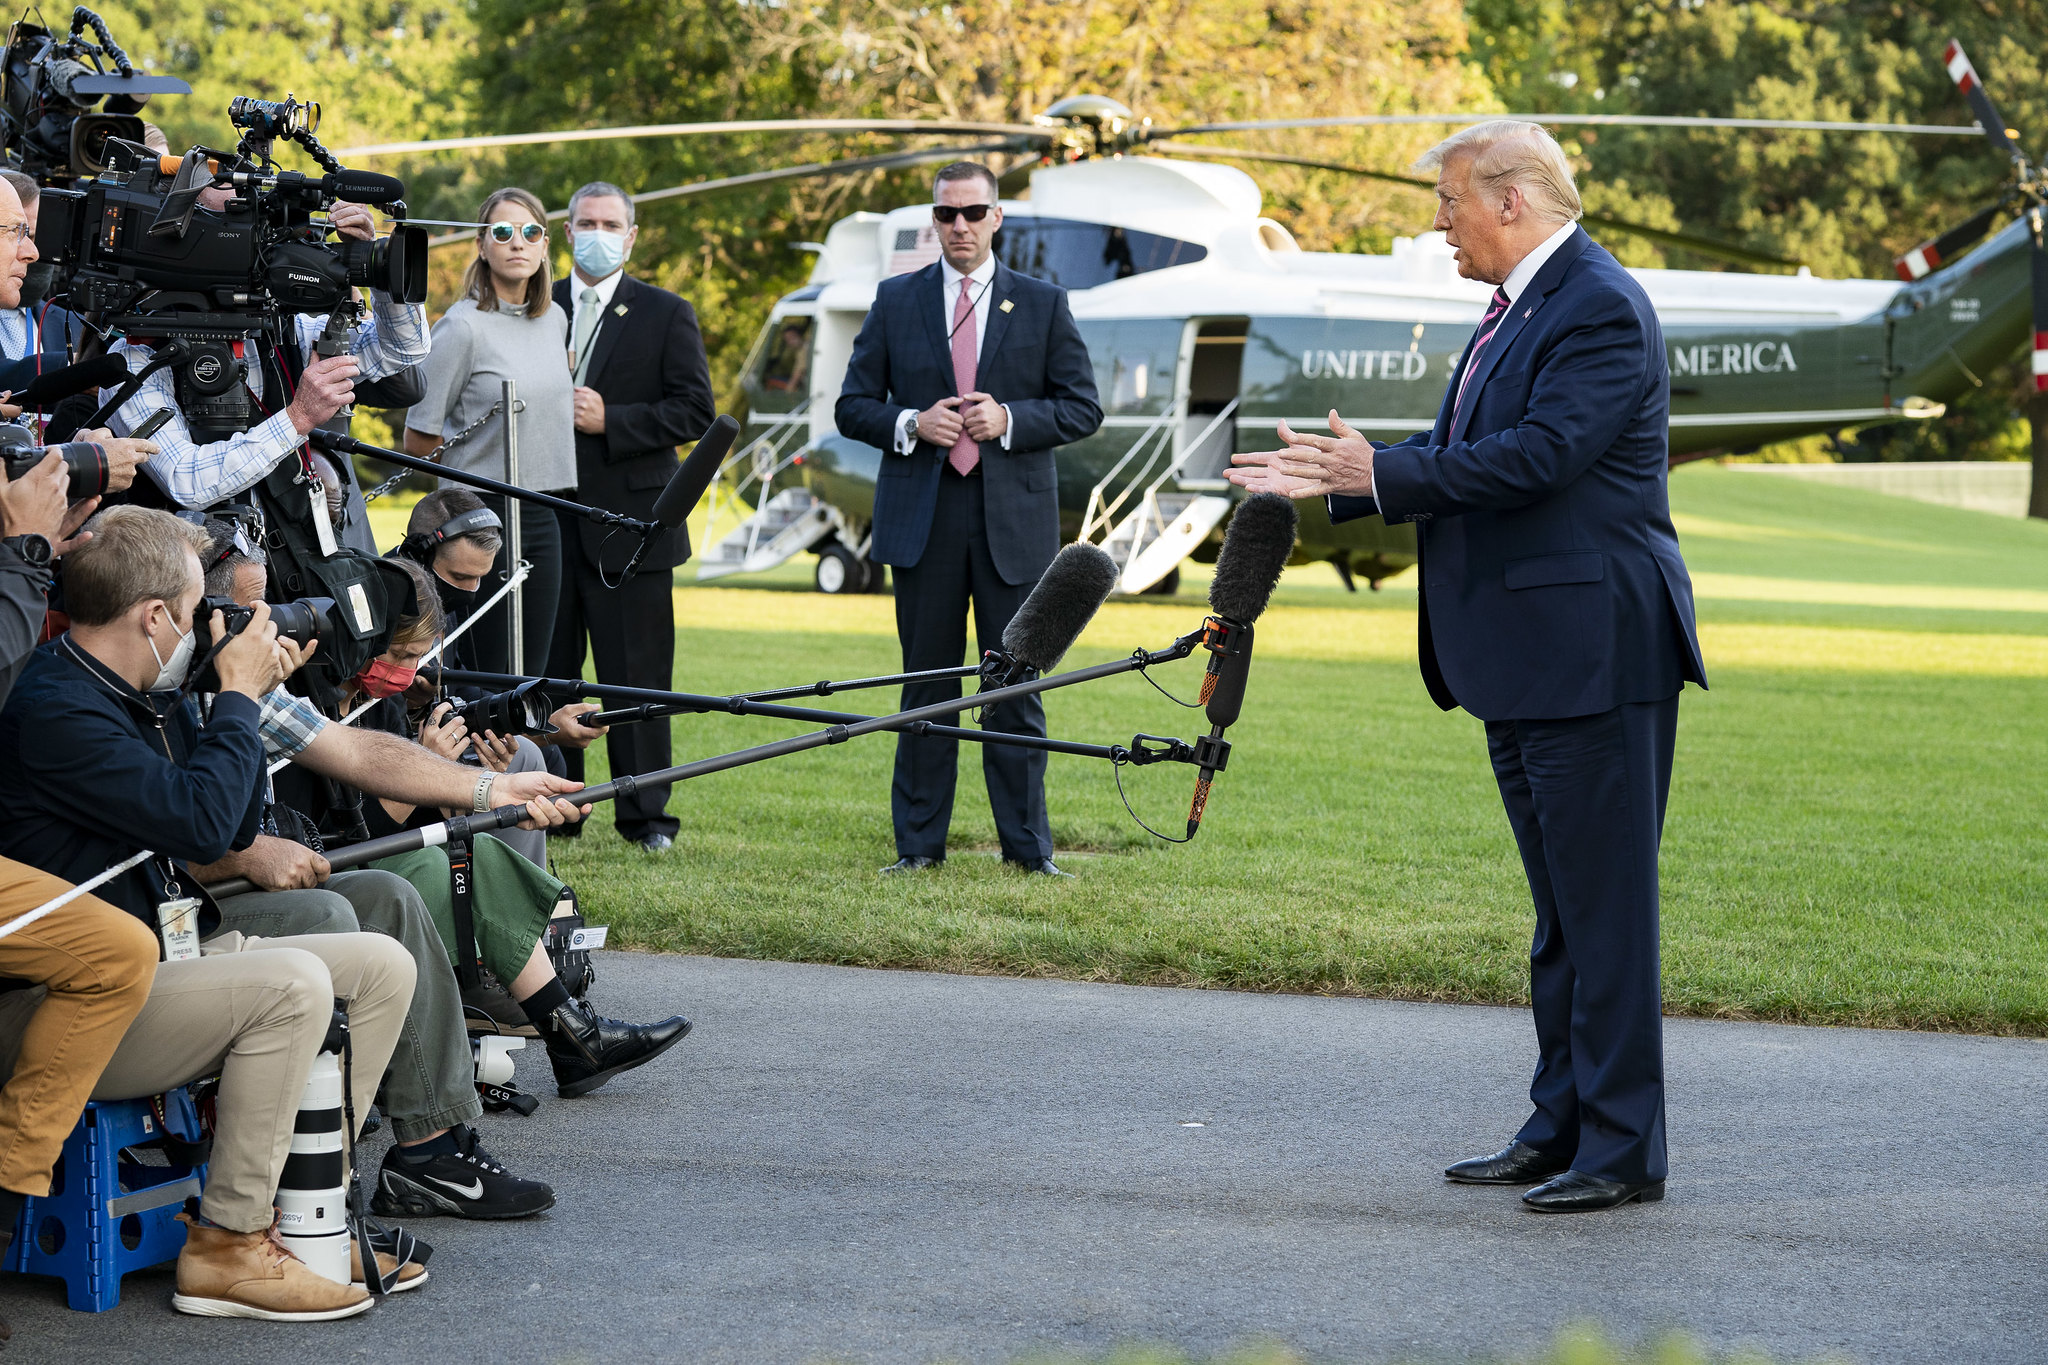 trump press conference today marine one